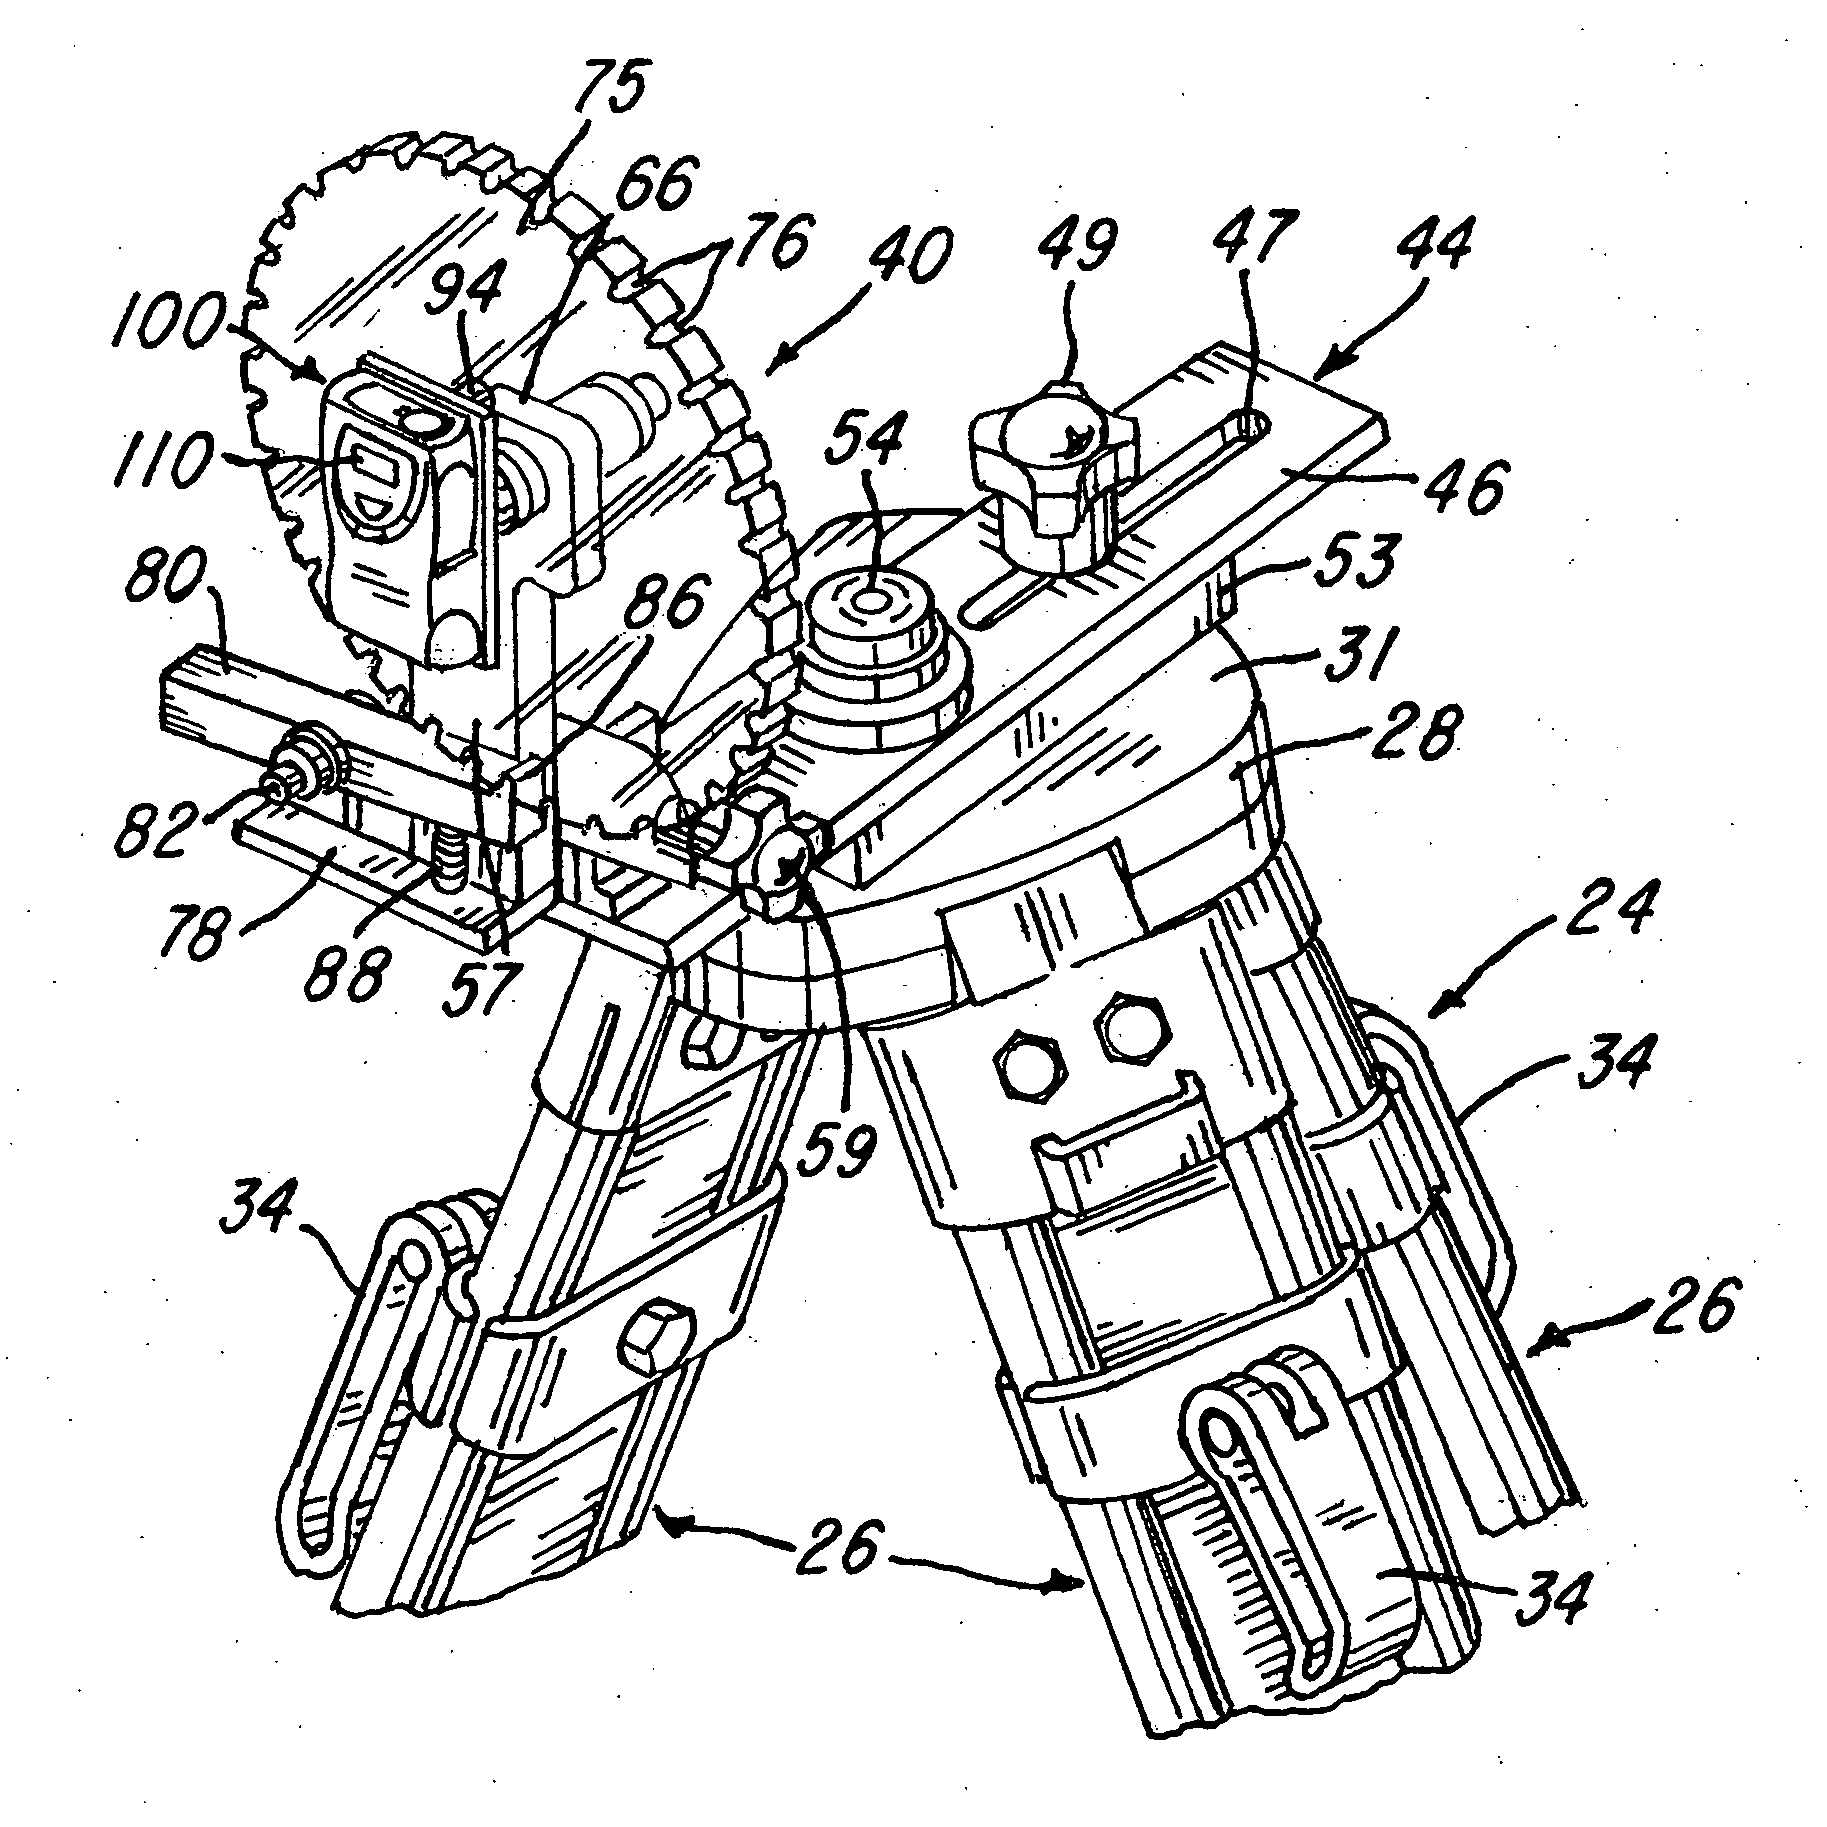 Apparatus for measuring the inner surface of a culver or other tunnel defining structure imbedded in the ground